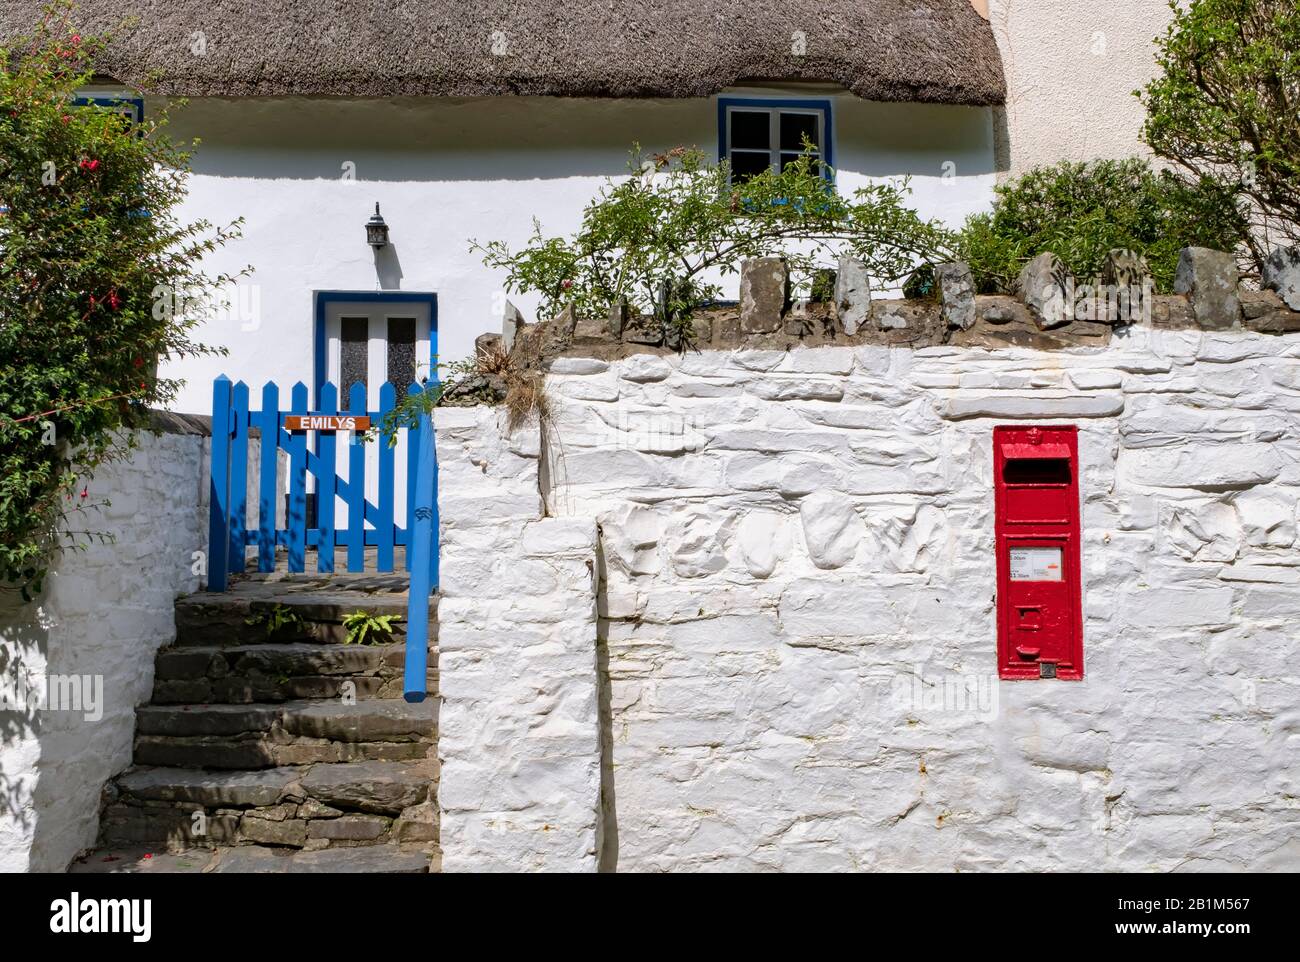 The cottages and holiday cottages at the charming holiday destination of Bucks Mills with a red post box on the wall of the cottage, North Devon Stock Photo